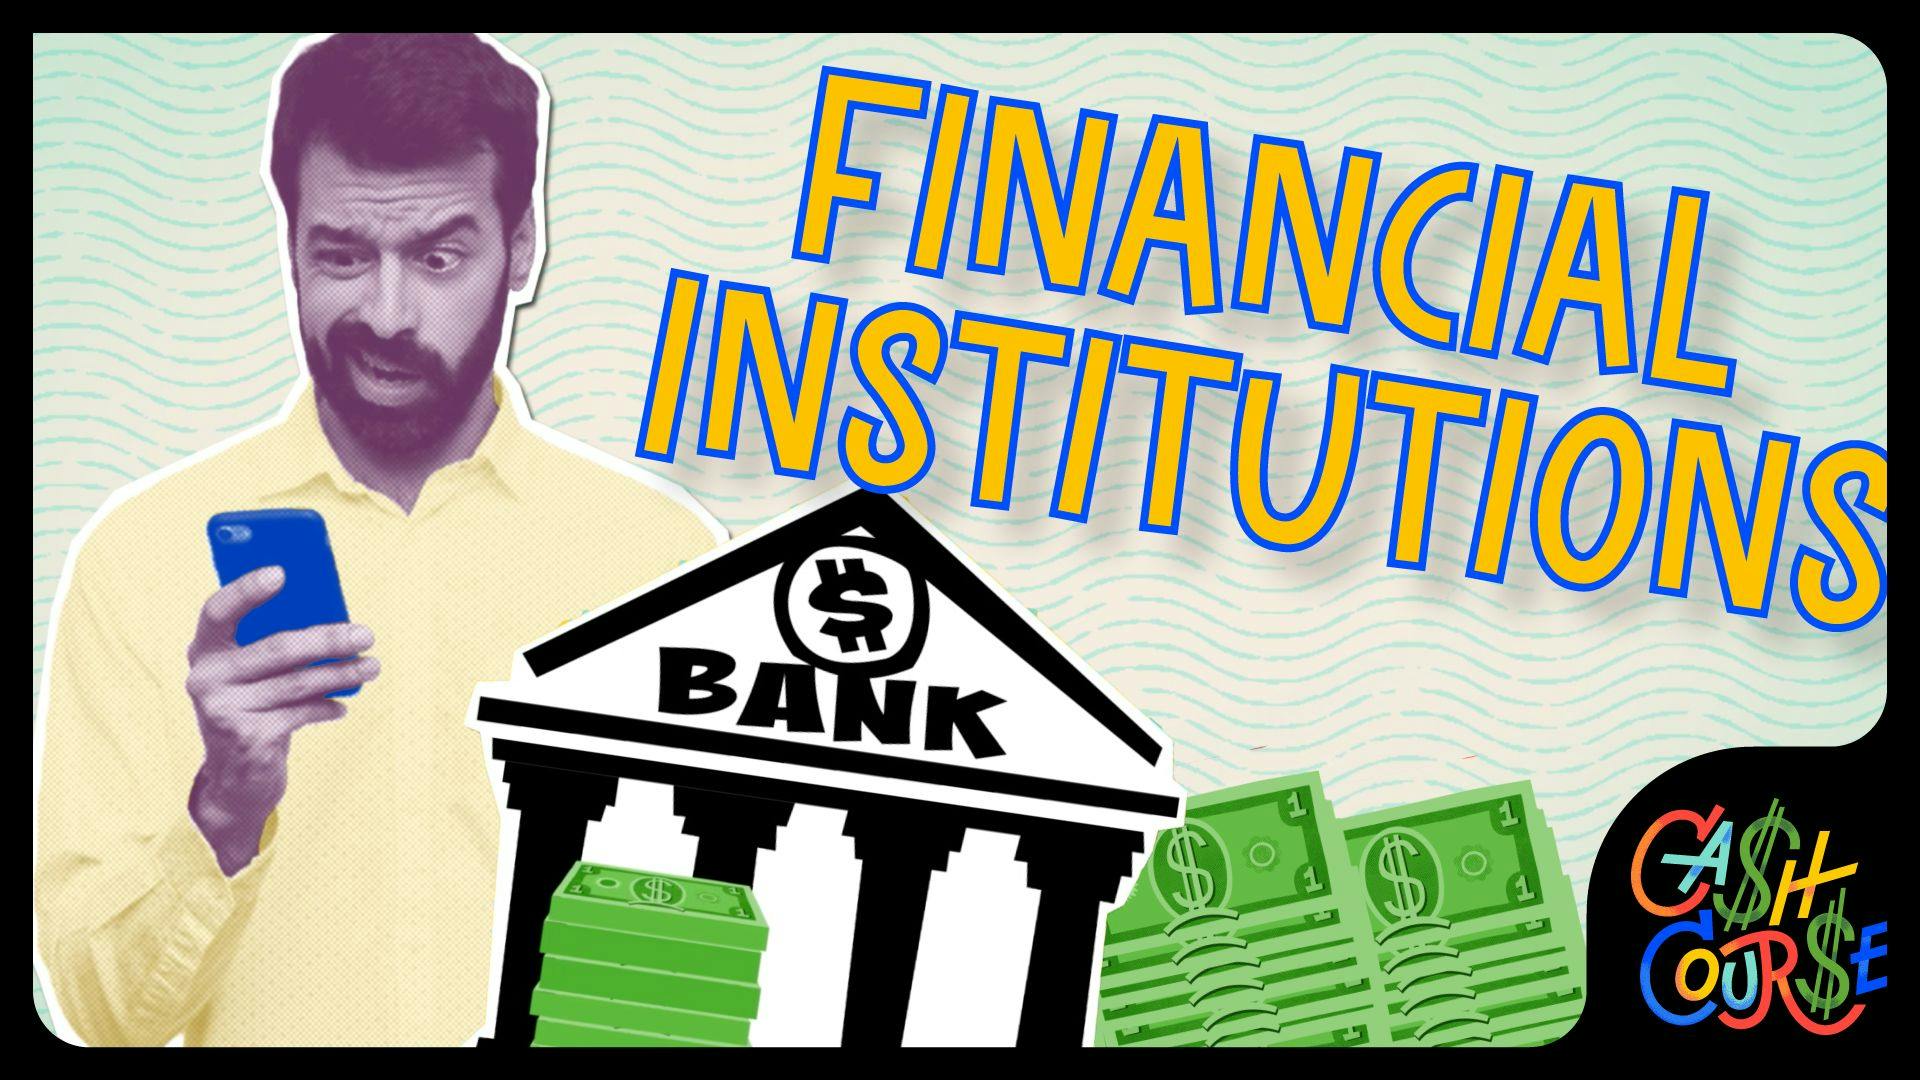 Using Financial Institutions